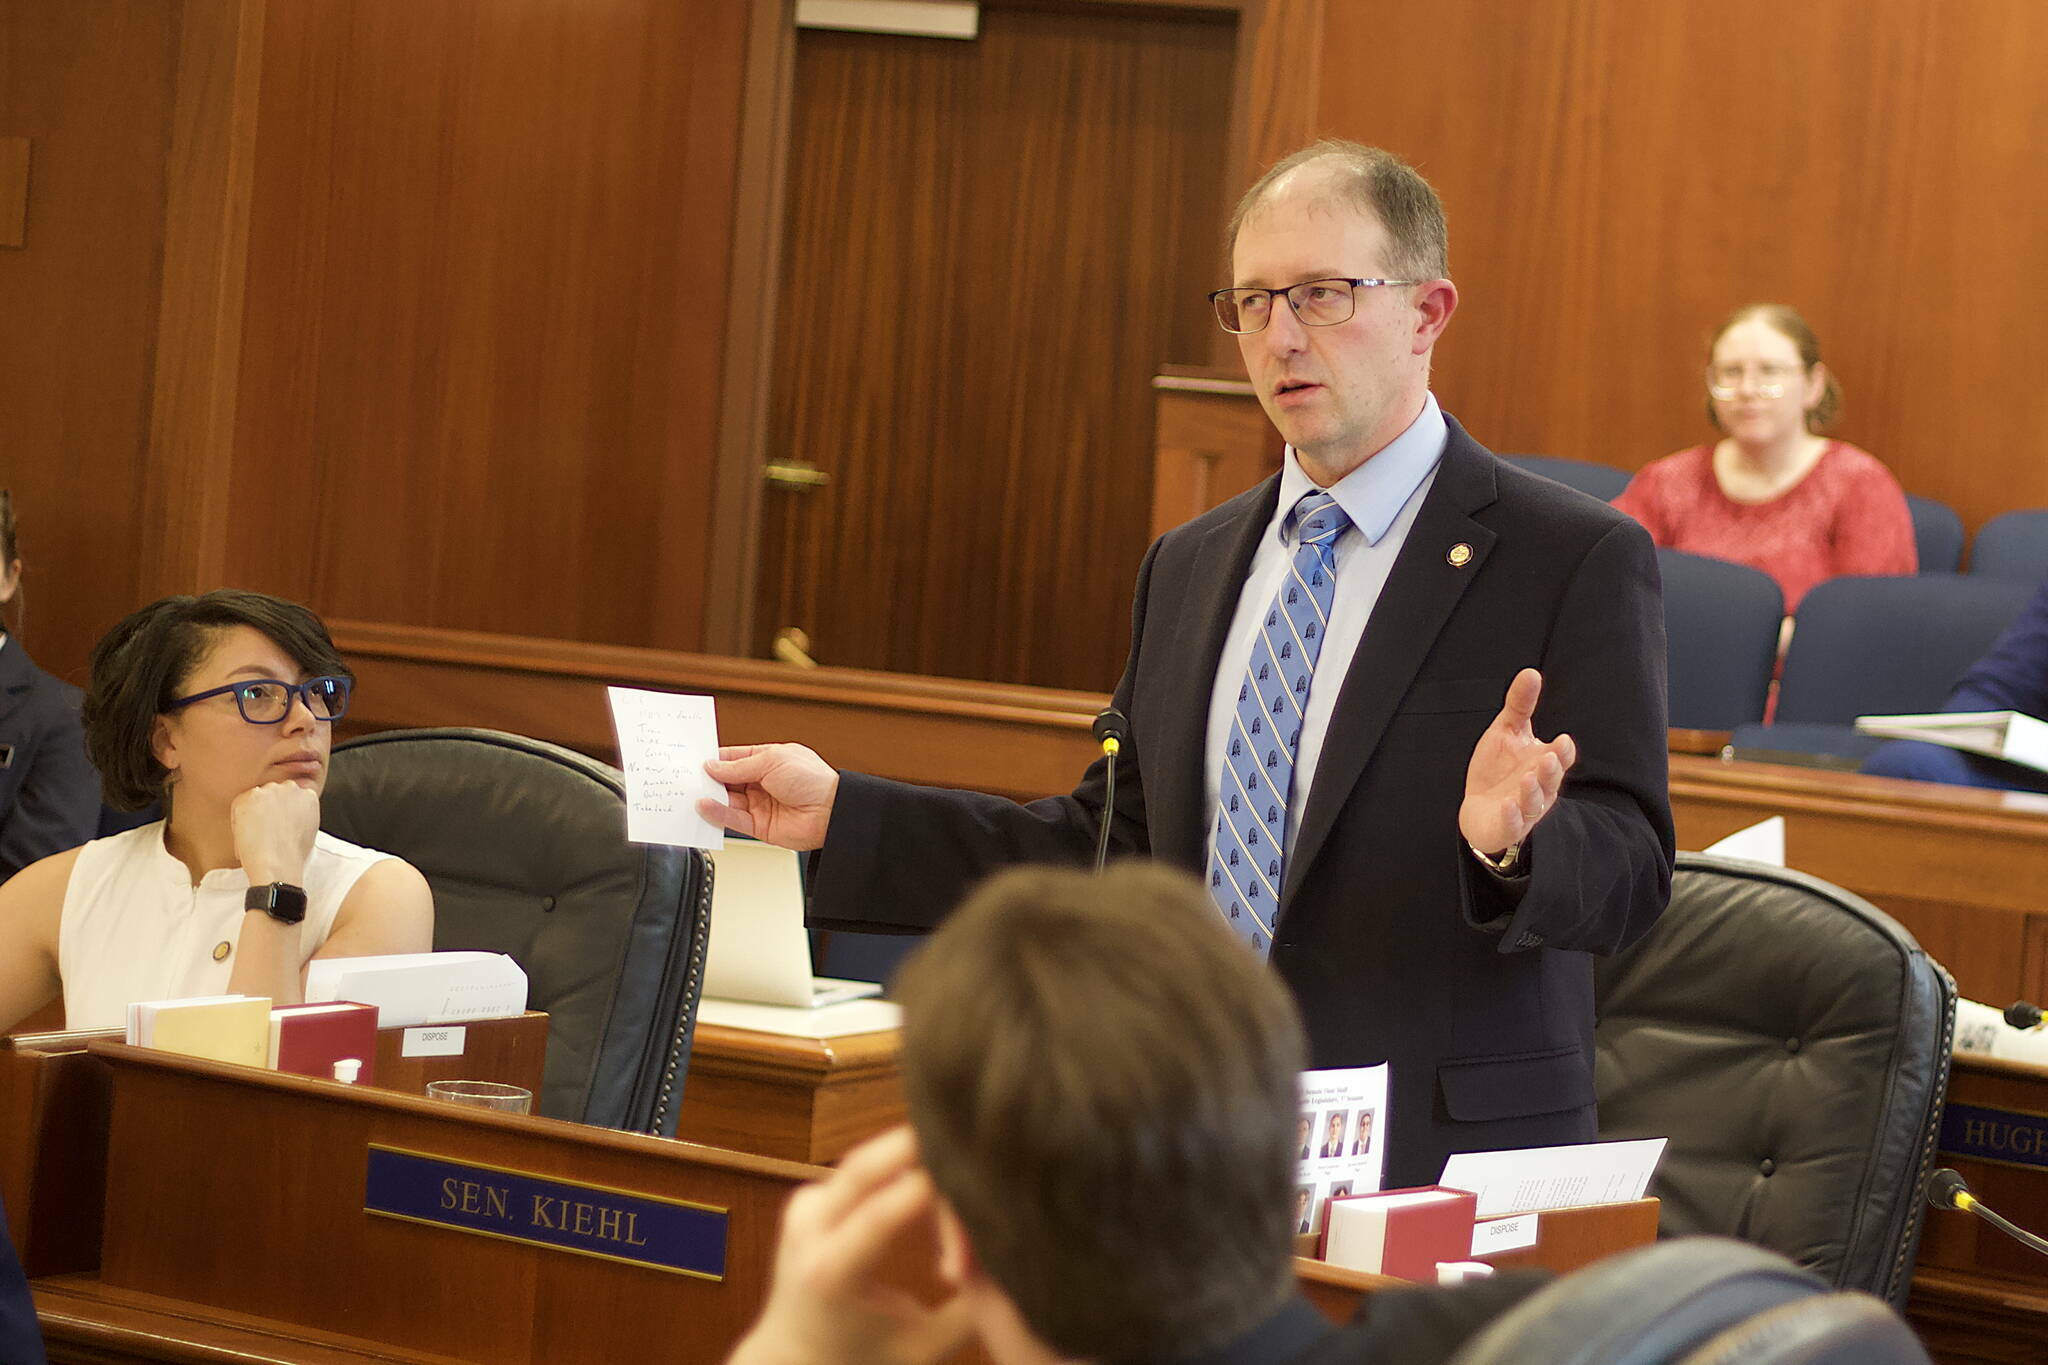 State Sen. Jesse Kiehl, D-Juneau, explains the details of his bill banning PFAS chemicals for most firefighting during the Senate floor session on May 8. A bill with those provisions was vetoed Saturday by Gov. Mike Dunleavy. (Mark Sabbatini / Juneau Empire)